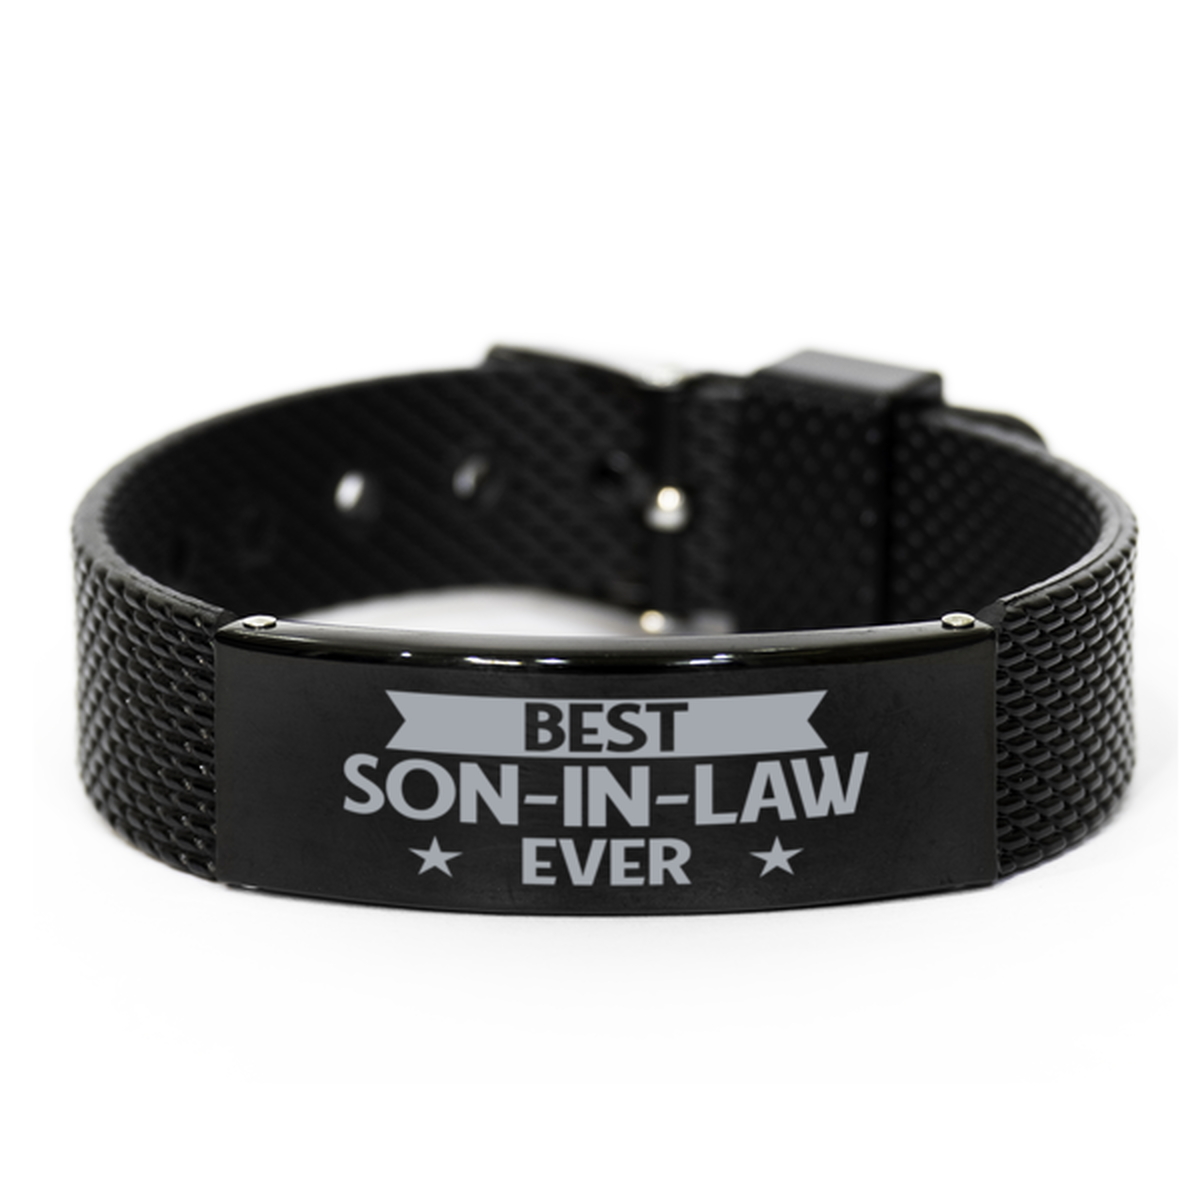 Best Son-in-law Ever Son-in-law Gifts, Gag Engraved Bracelet For Son-in-law, Best Family Gifts For Men